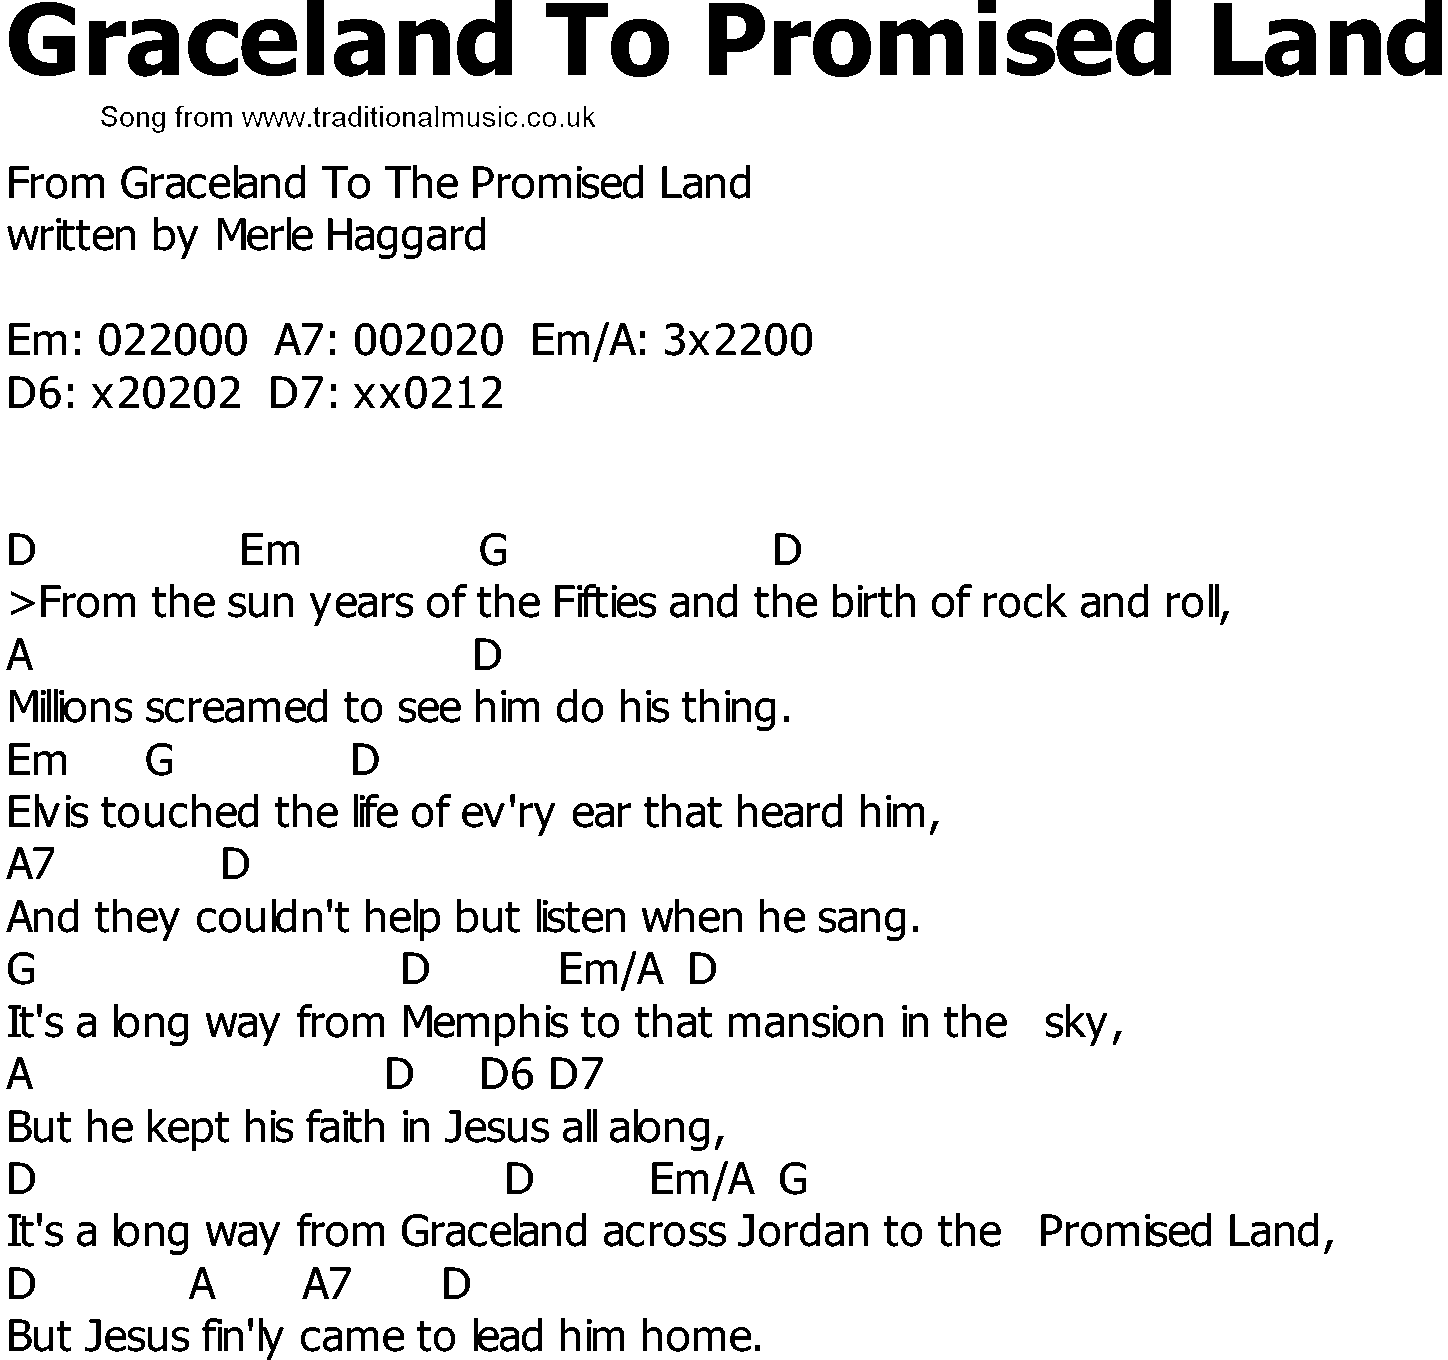 Old Country song lyrics with chords - Graceland To Promised Land